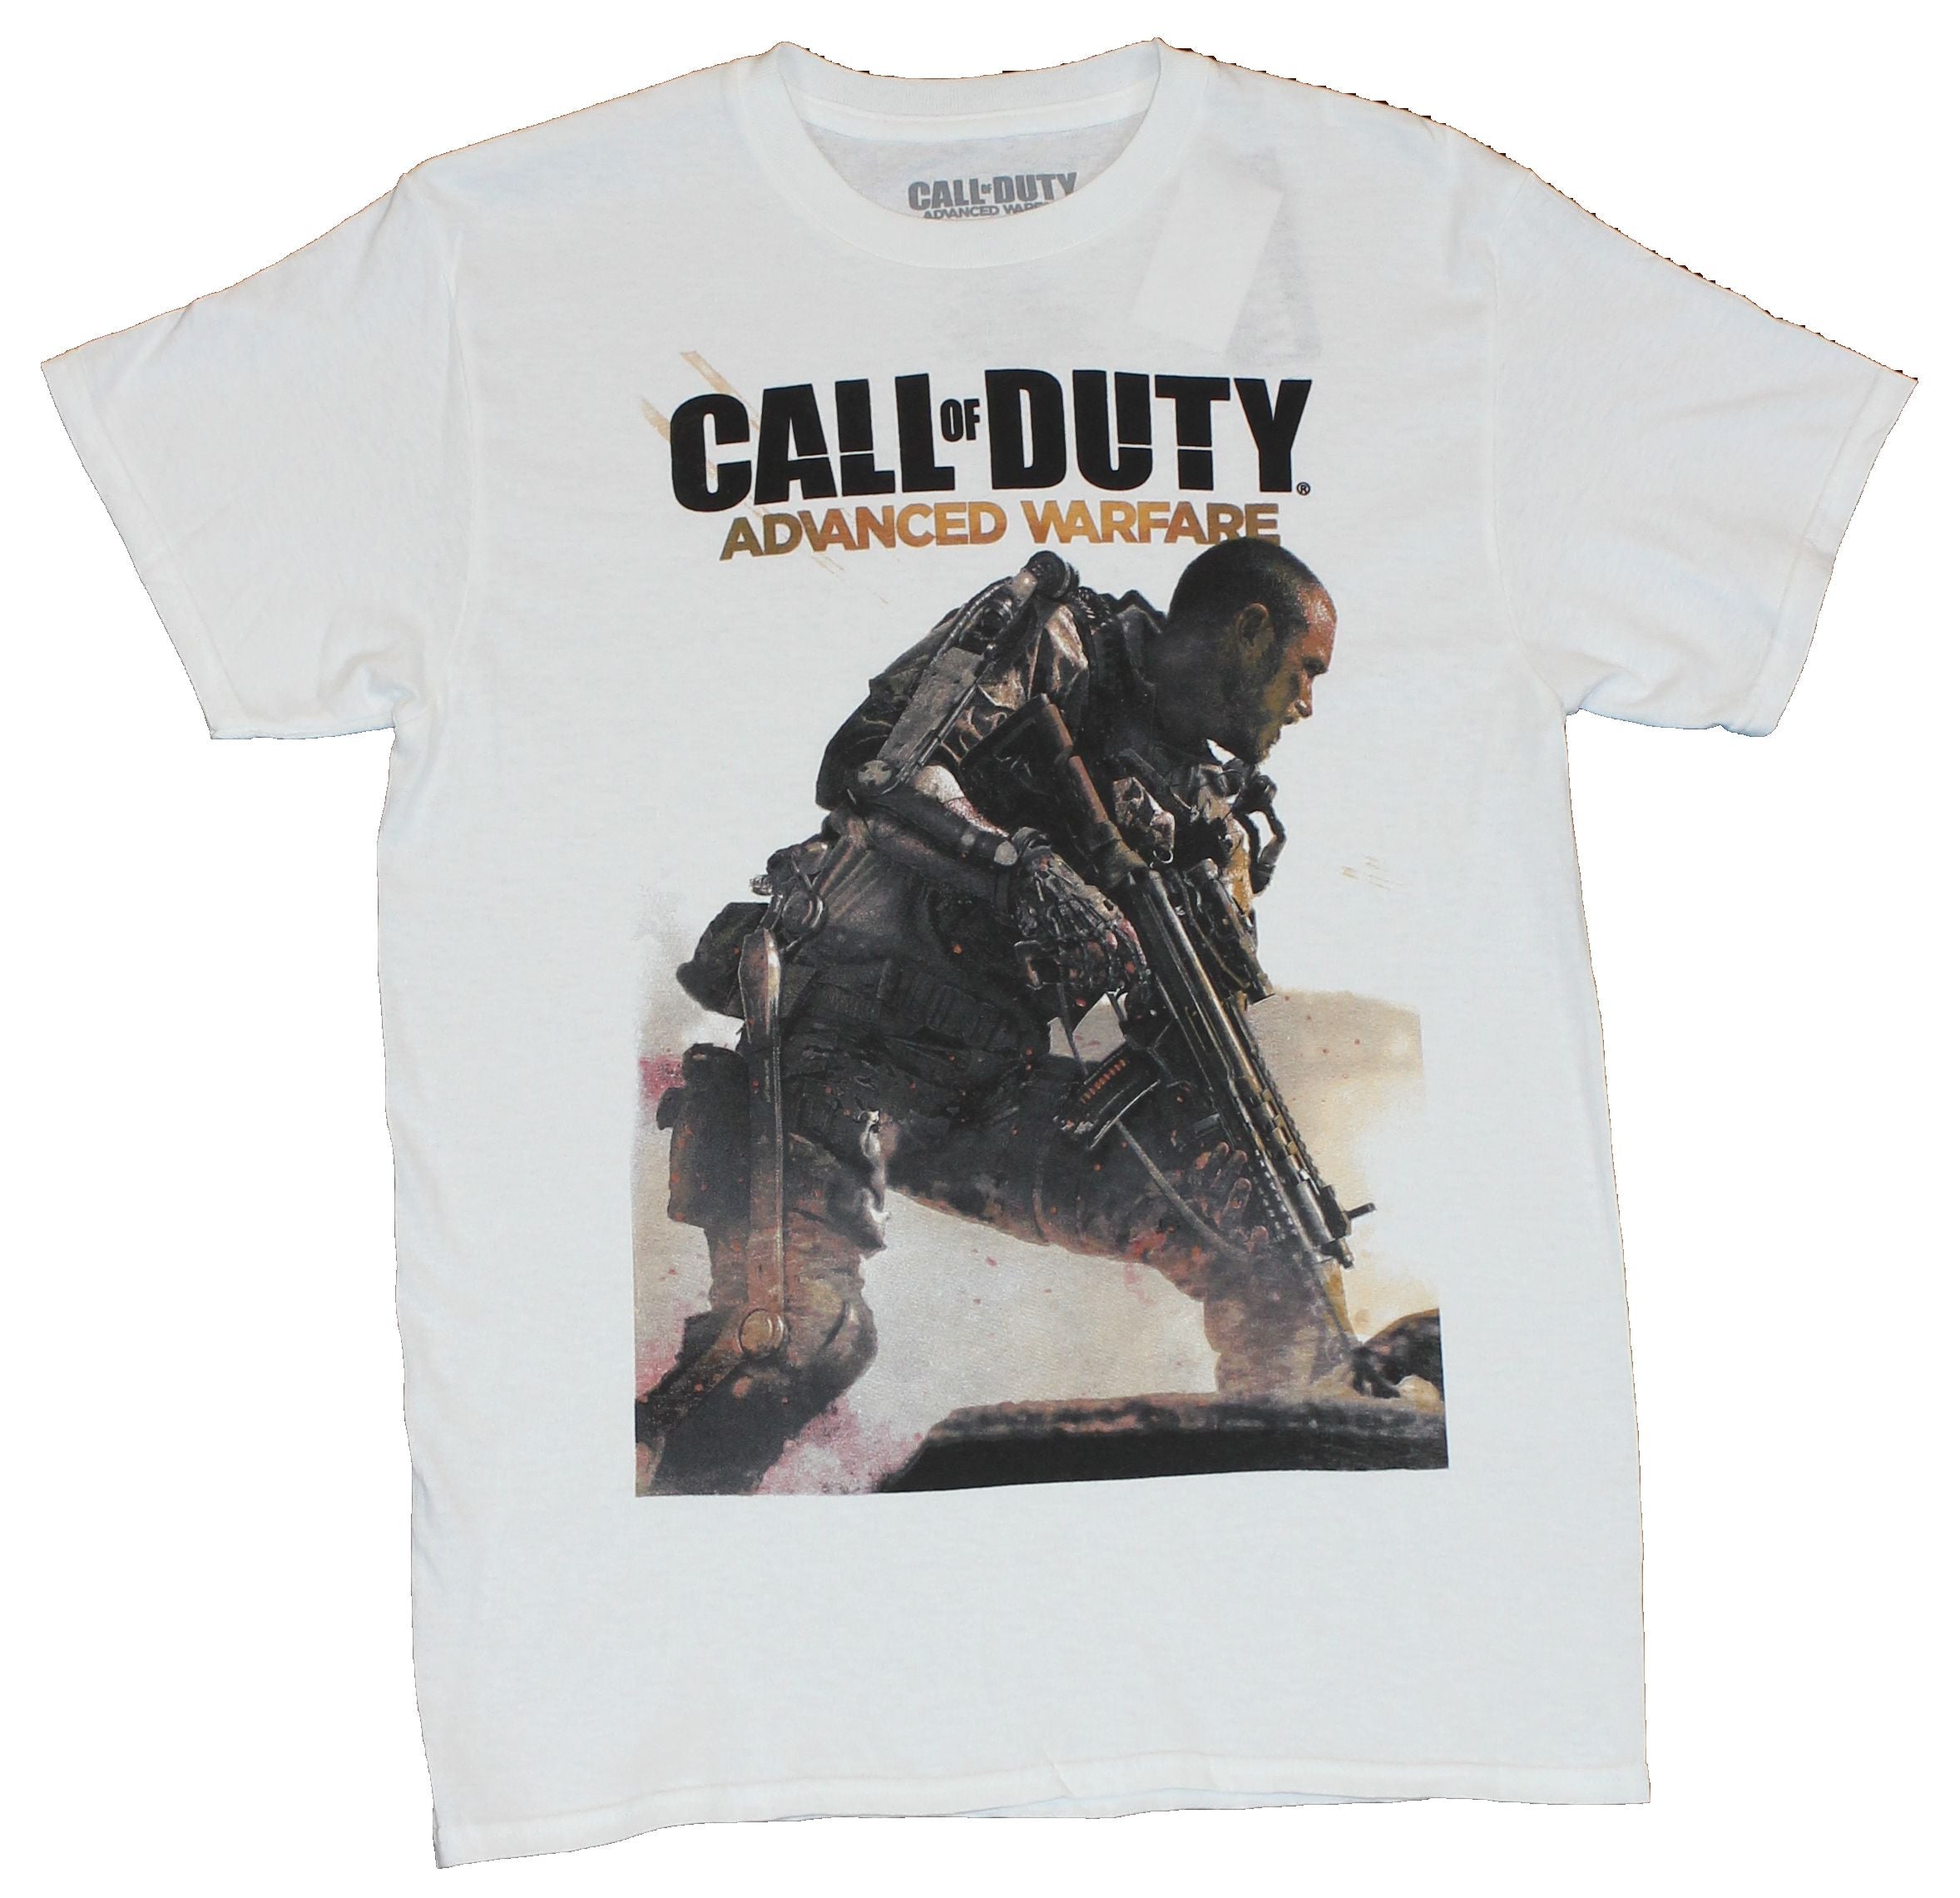 Call of Duty Advanced Warfare Mens T-Shirt - Crouched Battle Worn Solider Image